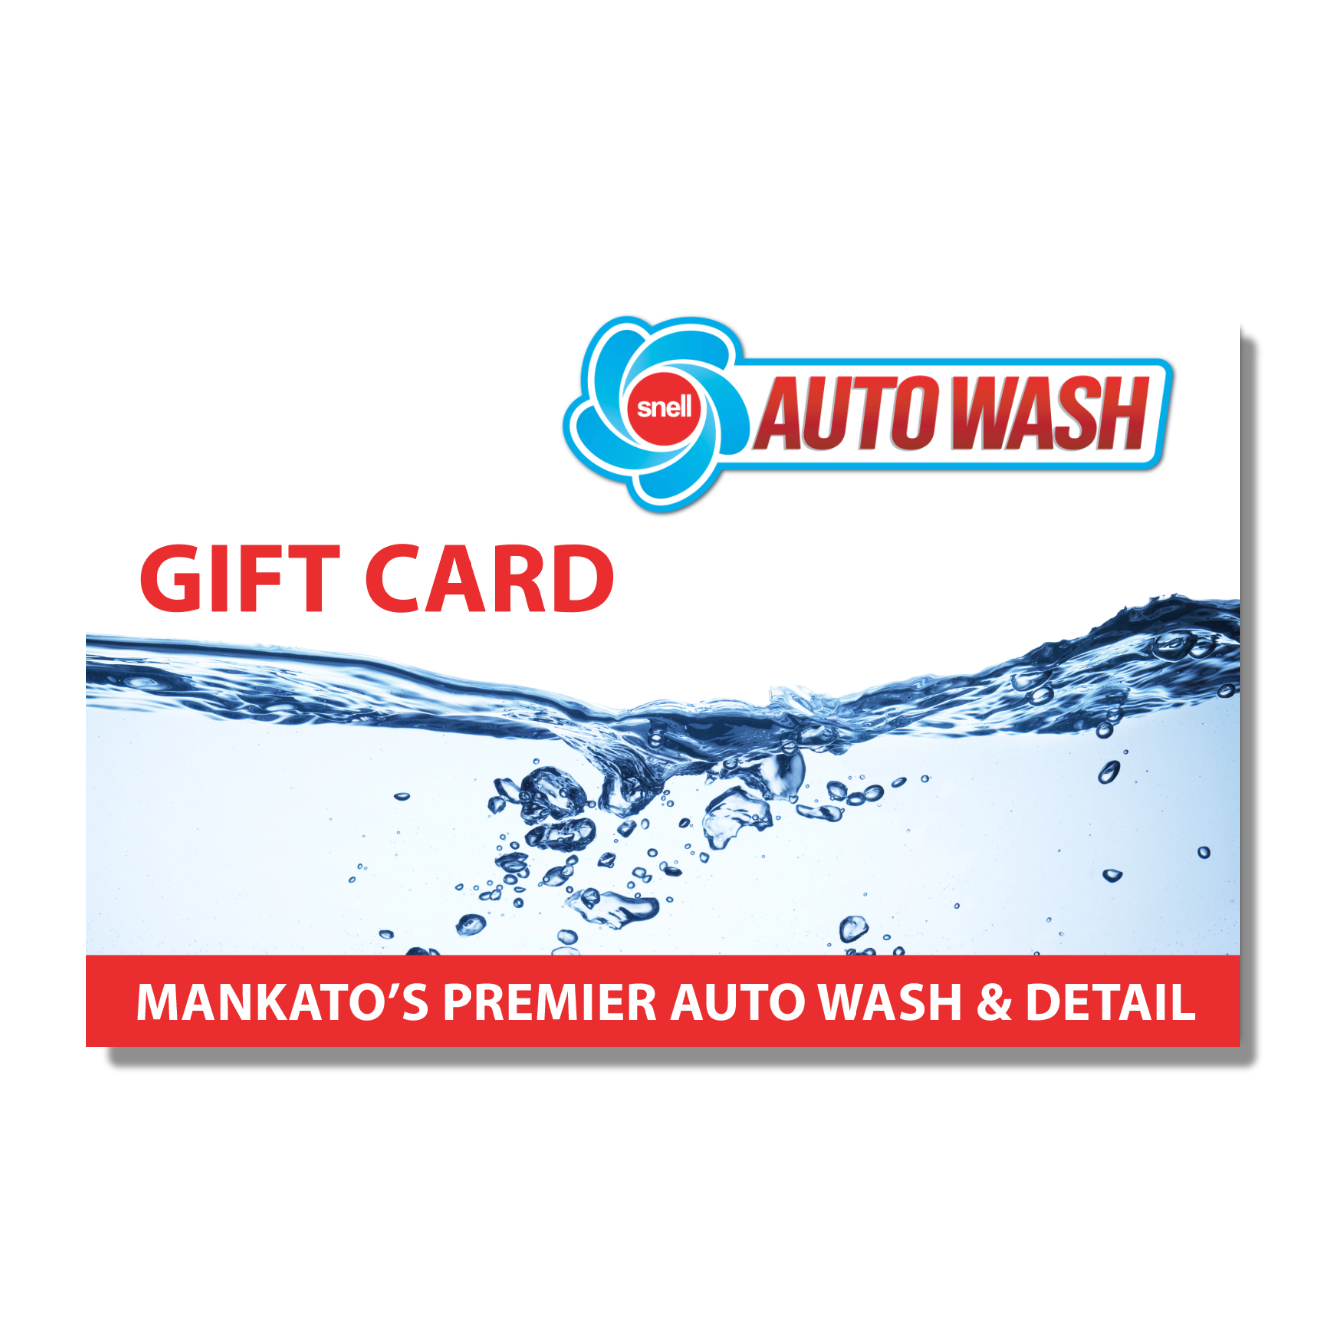 Snell Auto Wash Gift Card $25